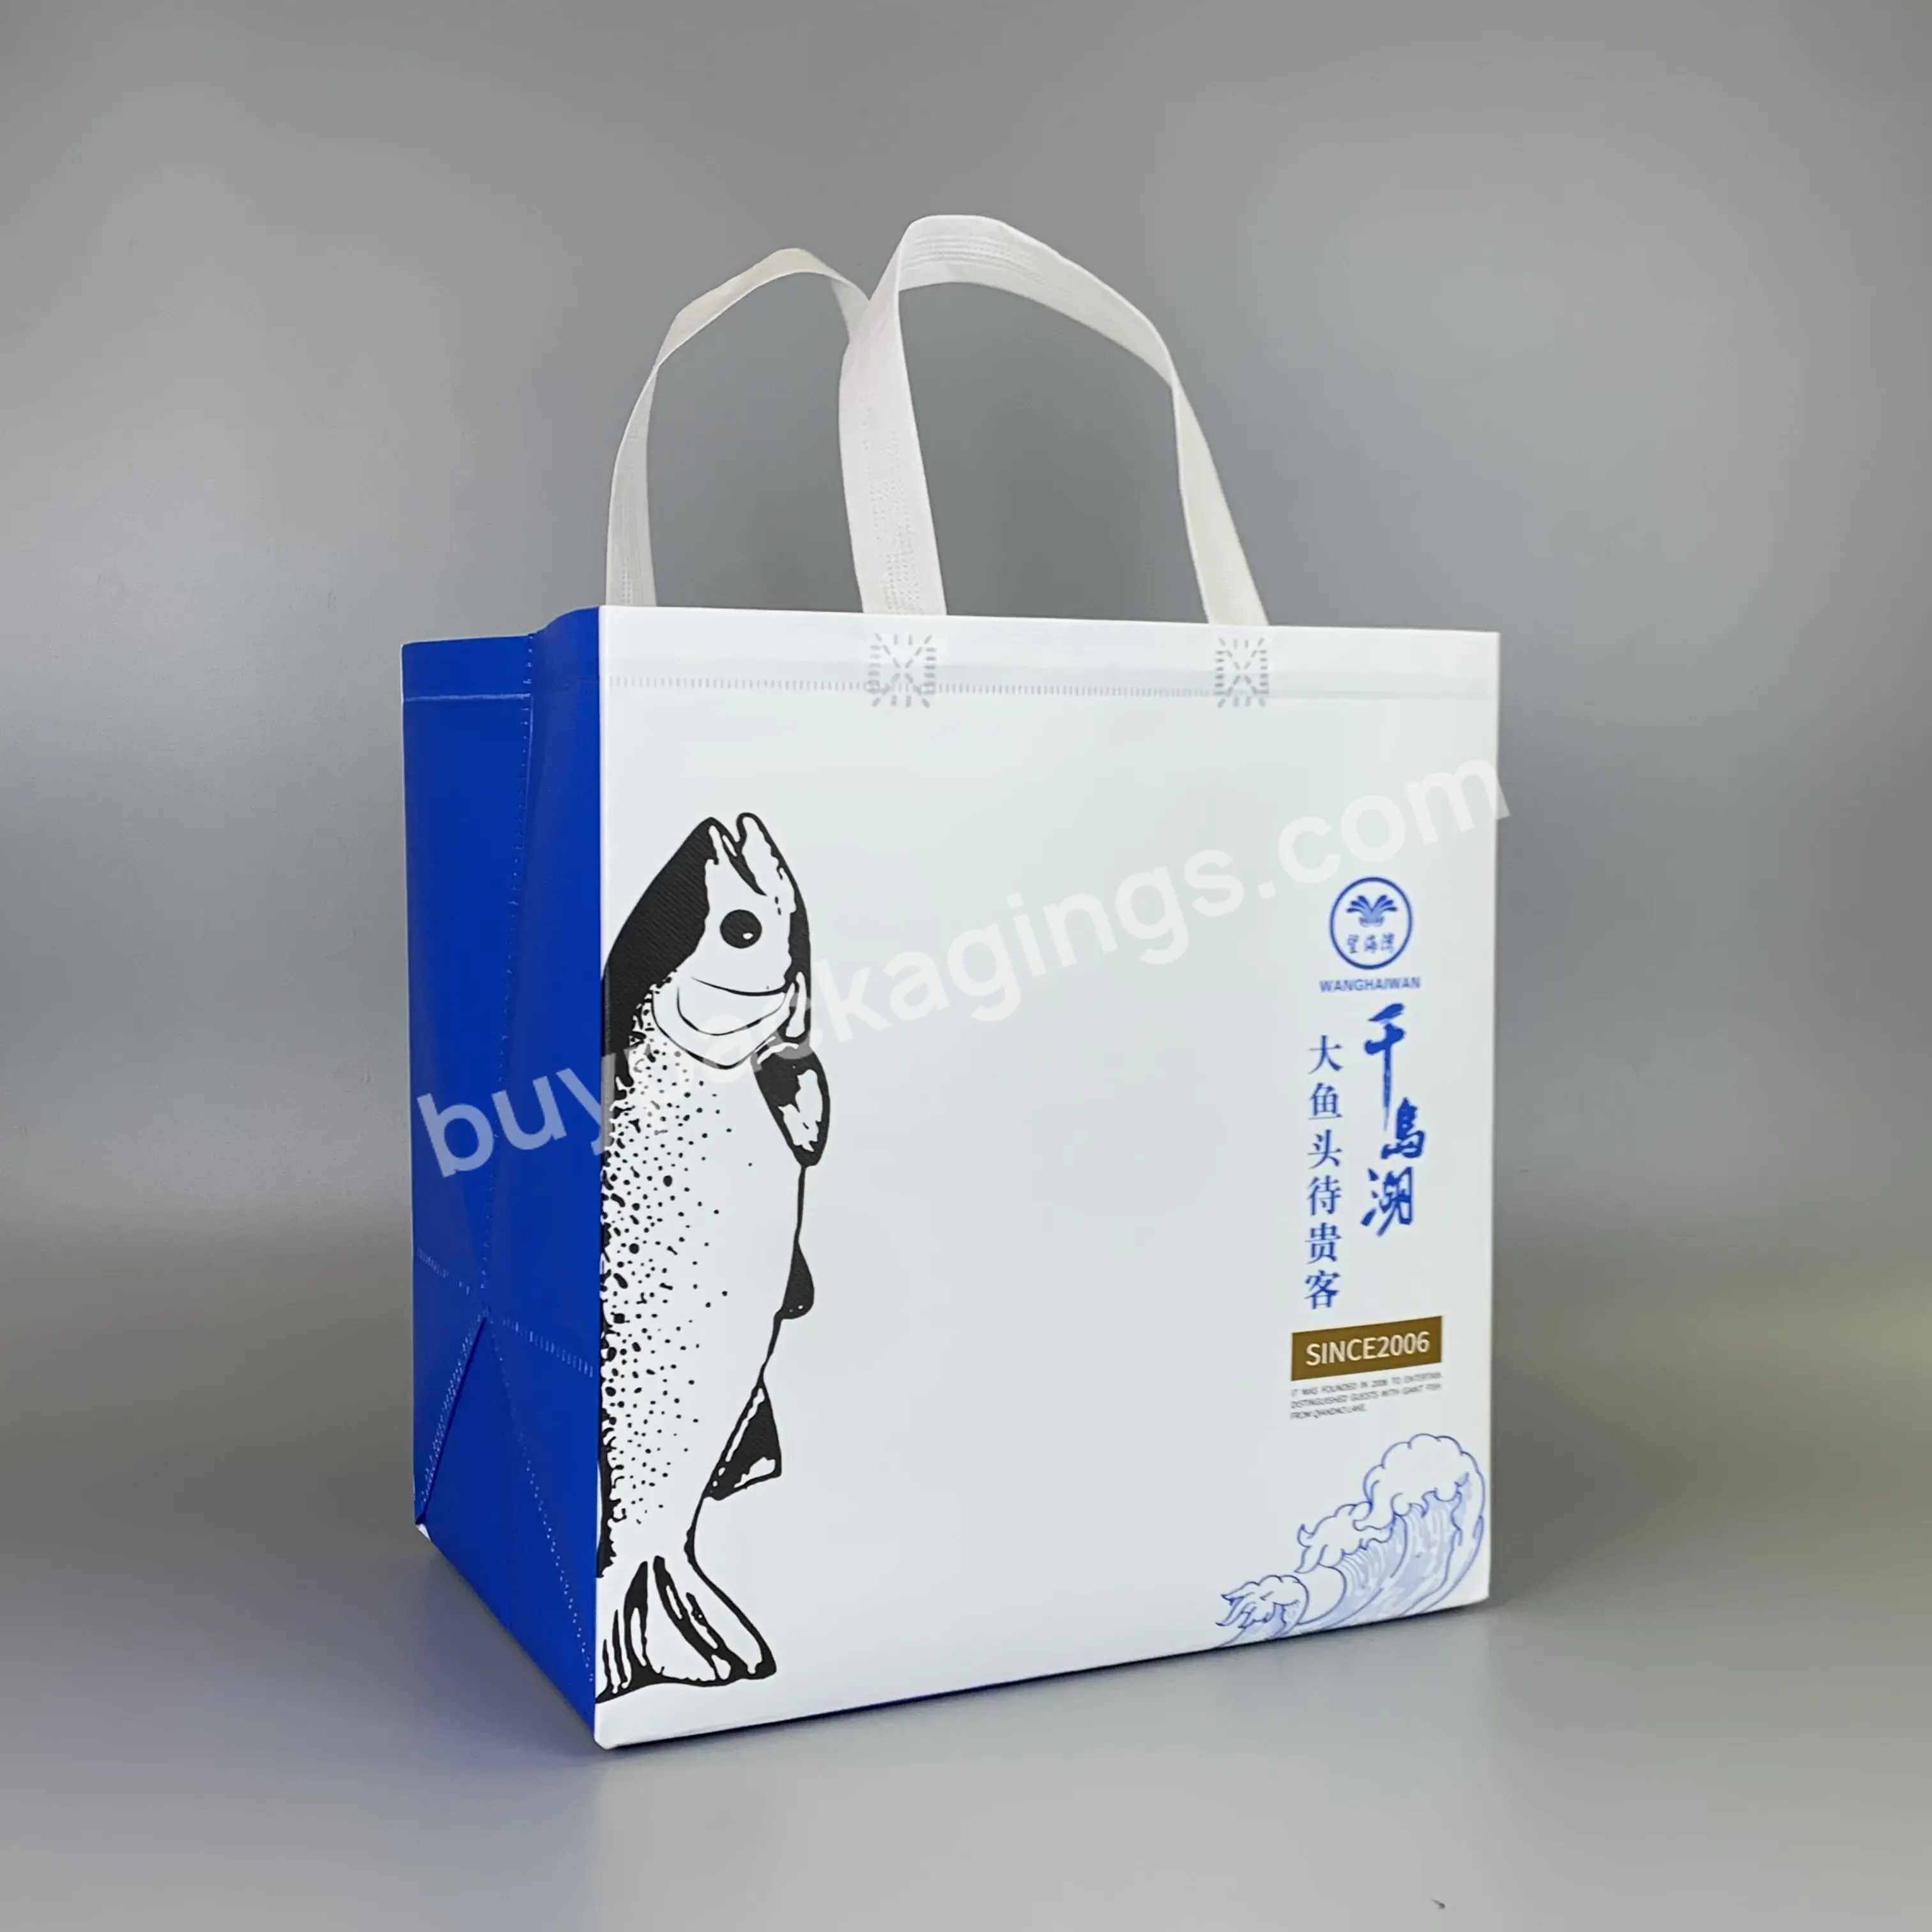 Customized Printing High Quality Colorful Recycle Thermal Insulation Handle Non Wovencooler Bag With Print For Packaging - Buy Handle Non Woven Bag,Non Woven Bag,Customized Non Woven Bag.